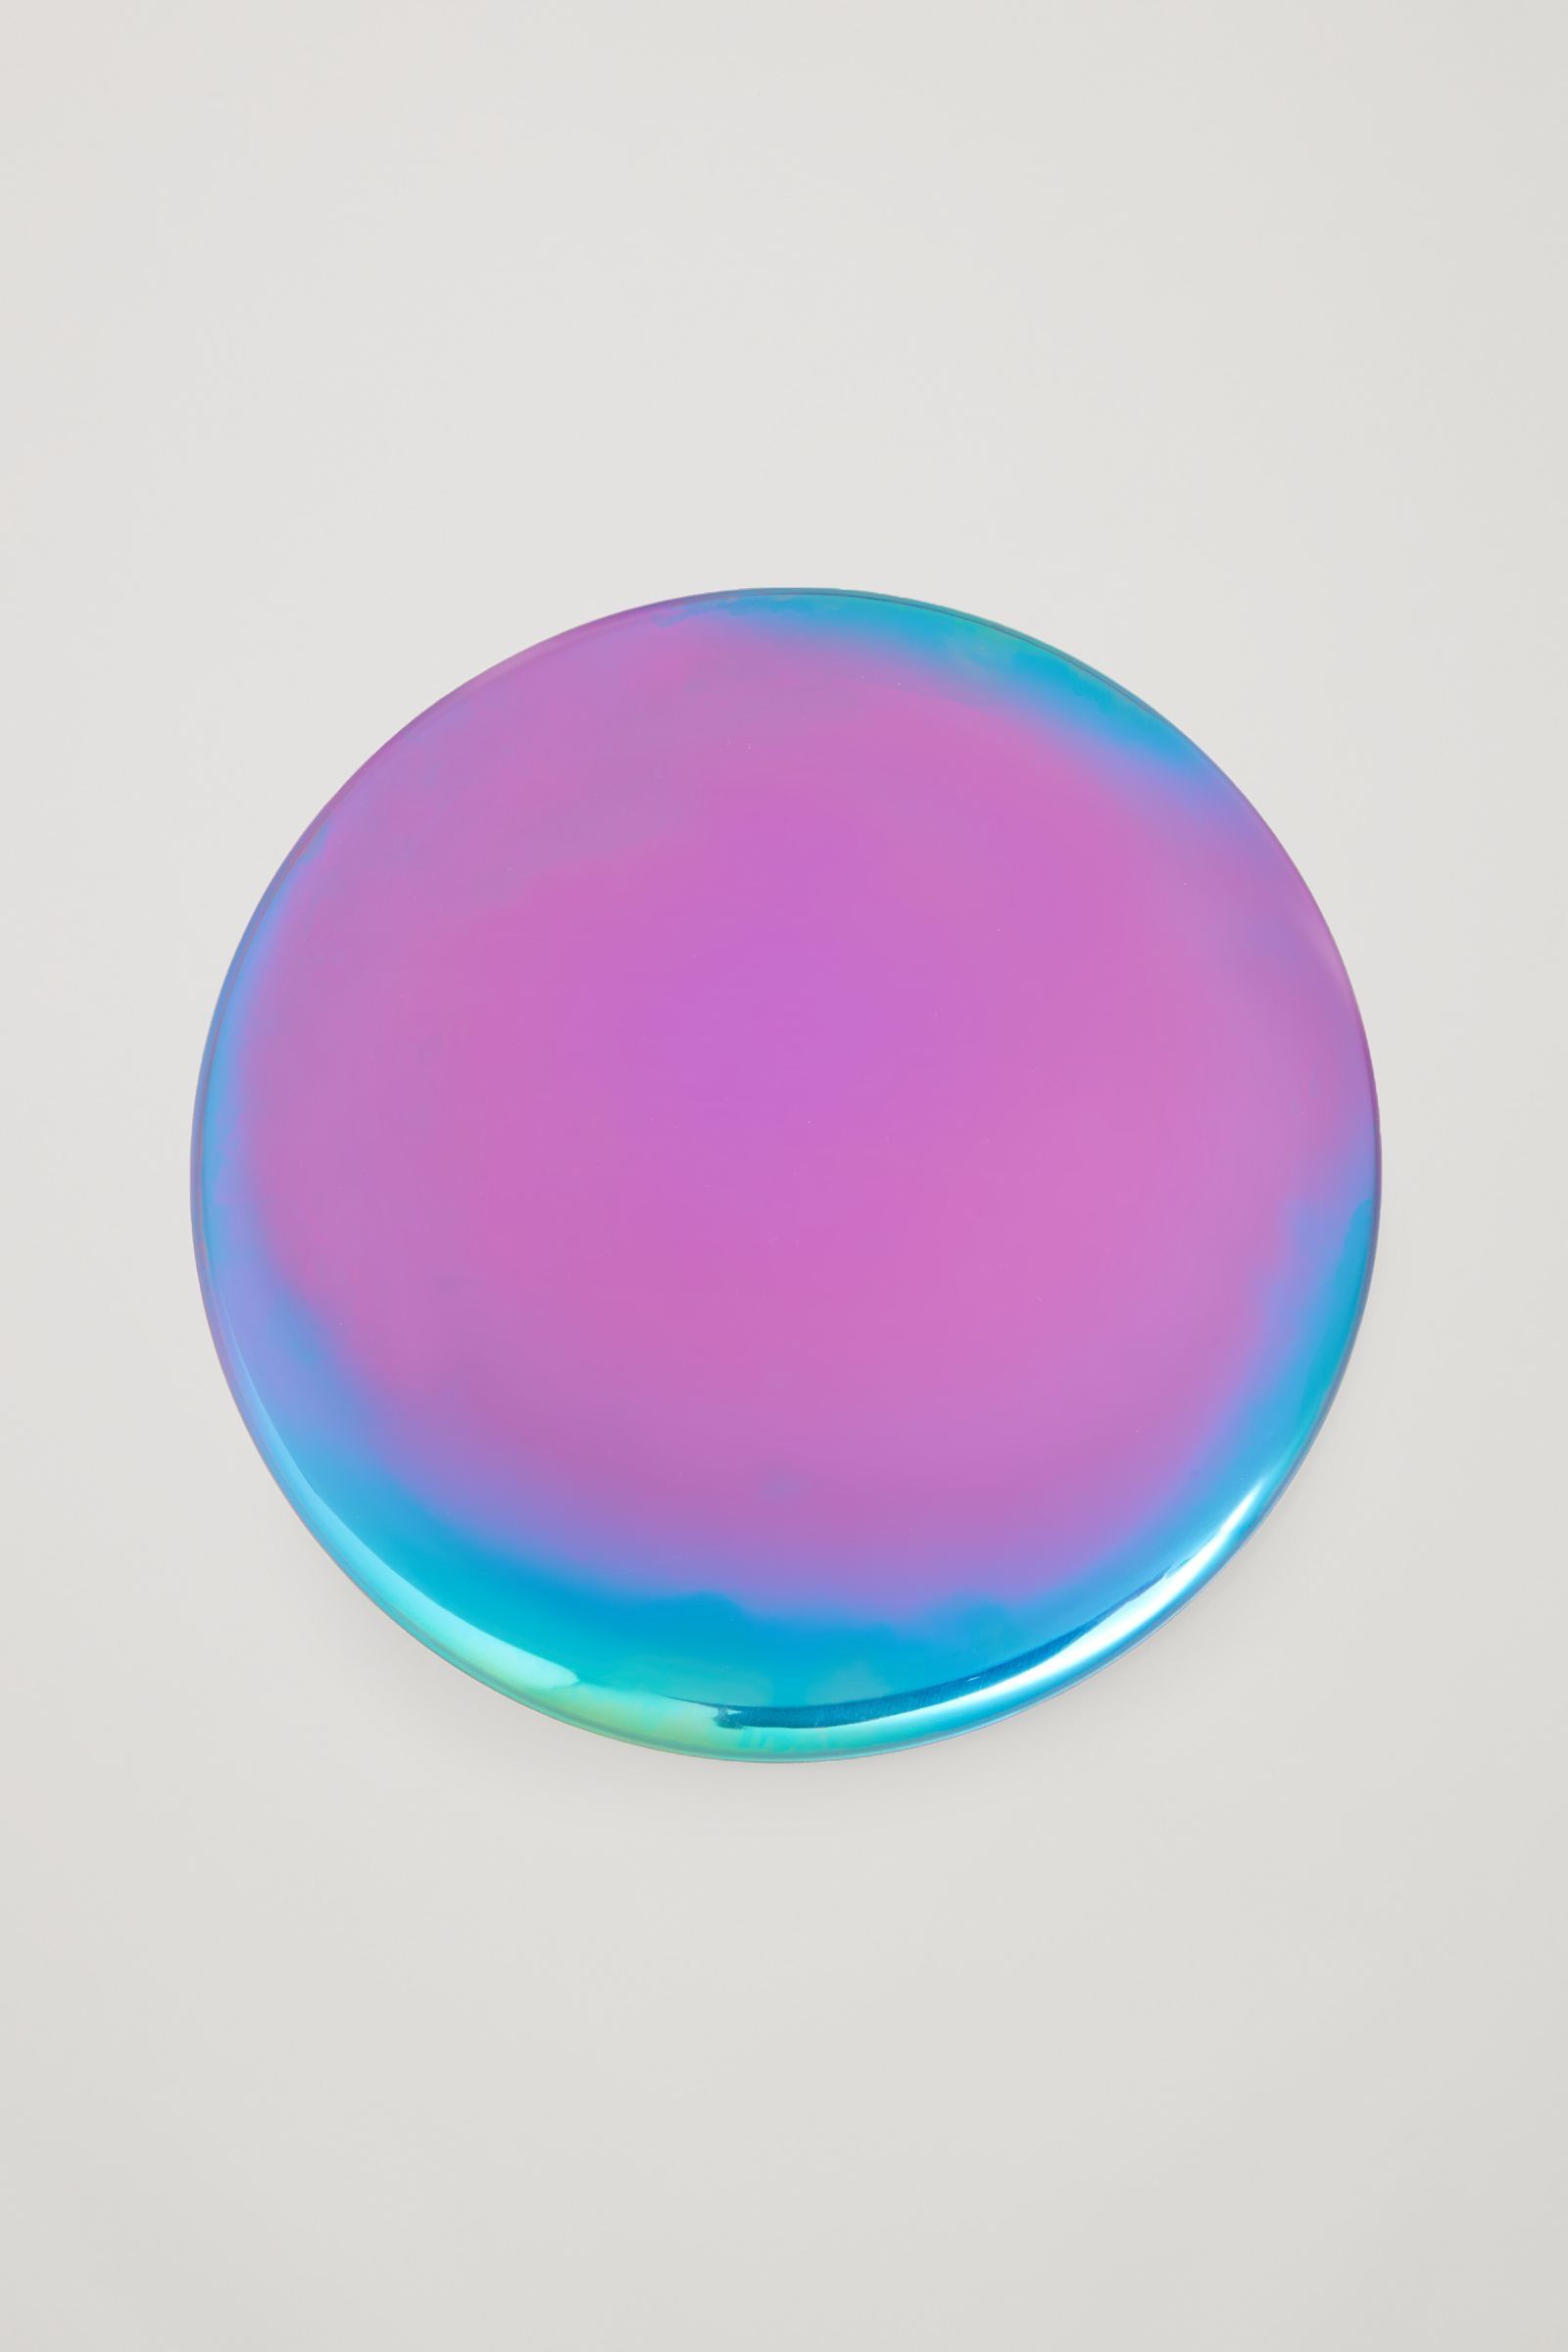 COS image 4 of HAY Serving Tray in Rainbow | goods | Pinterest